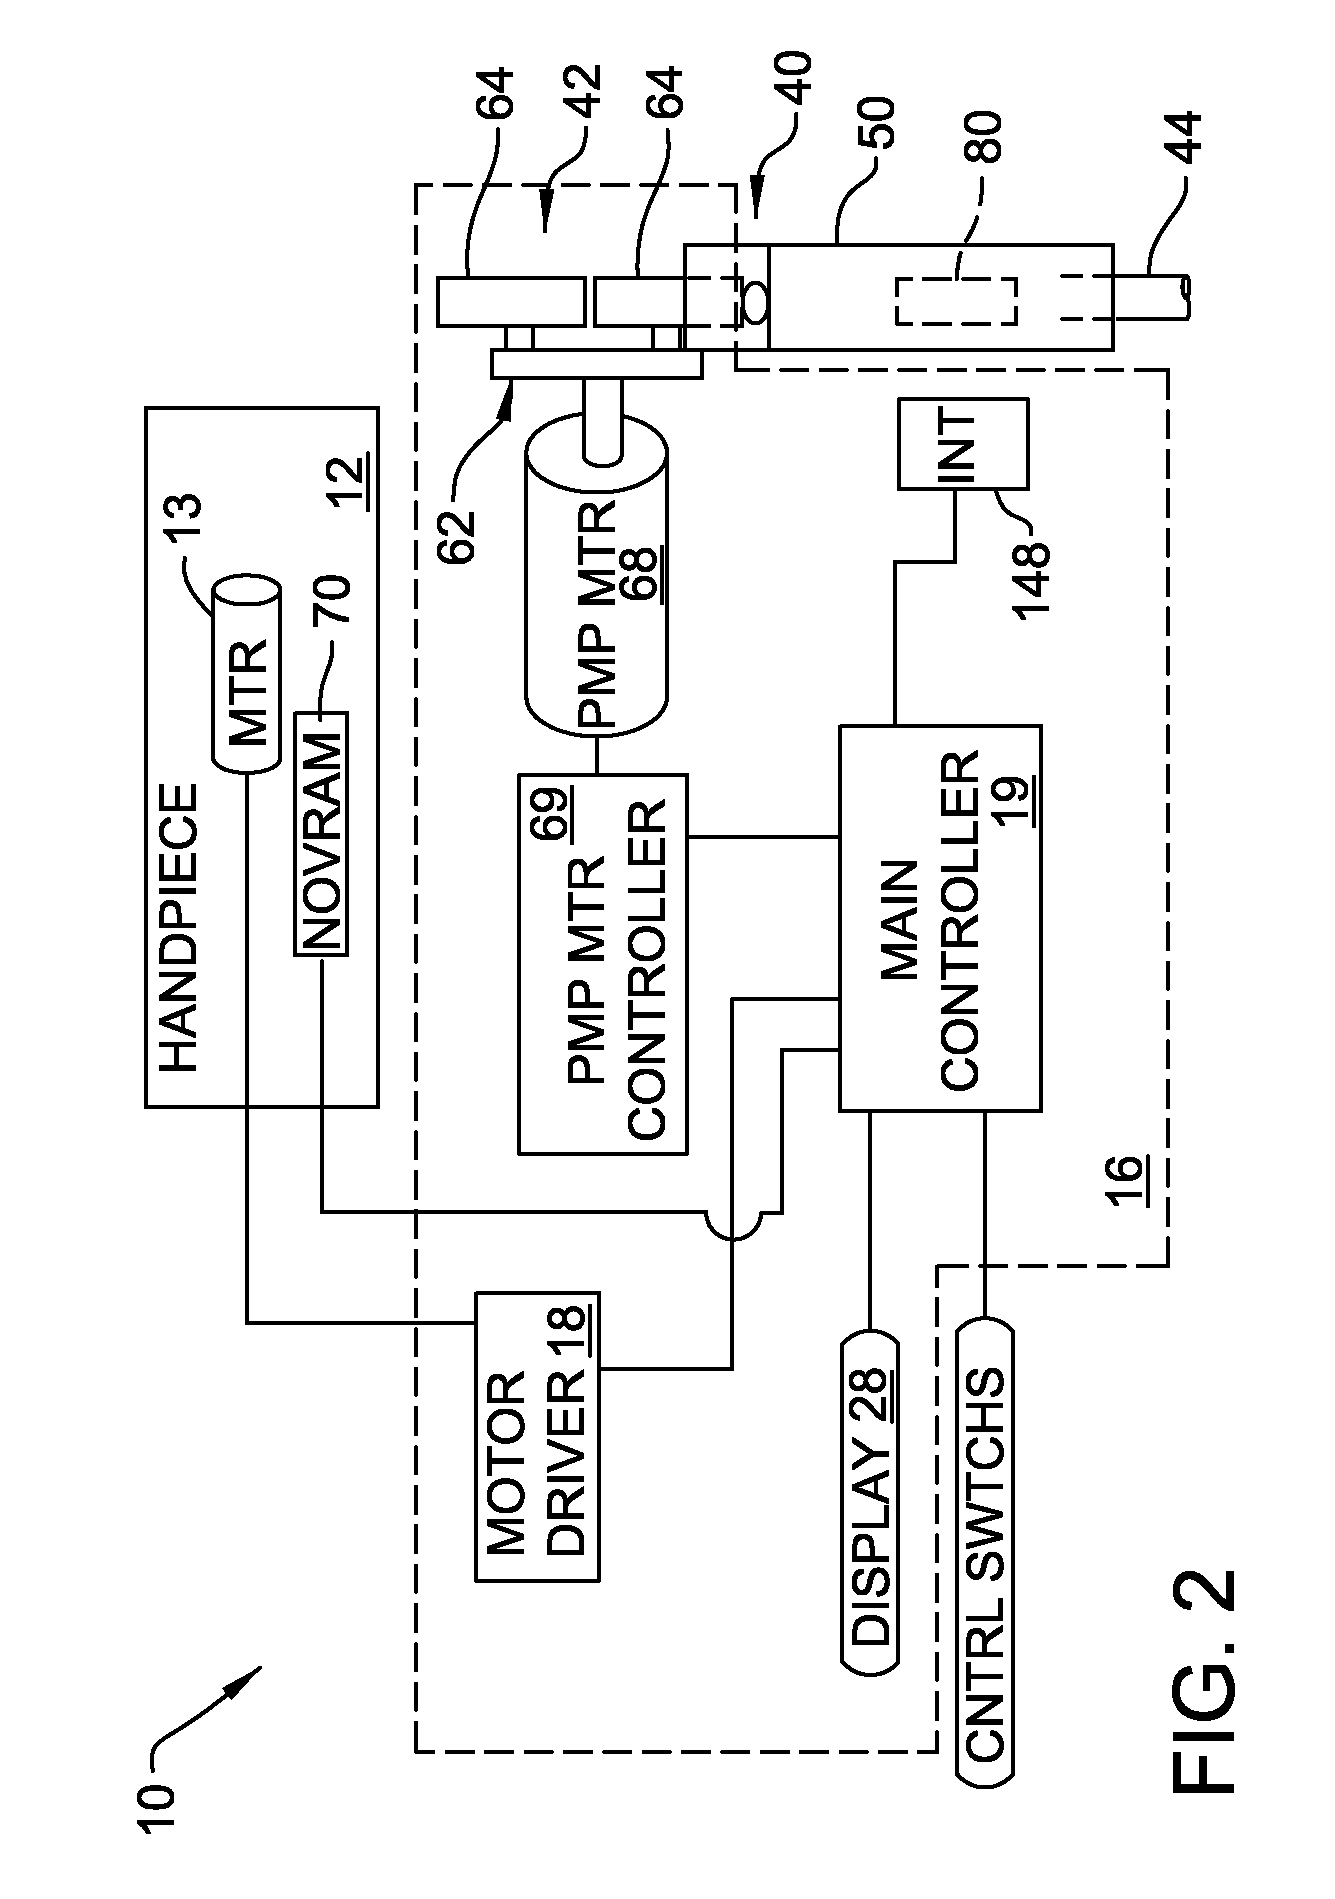 Method of operating a surgical irrigation pump capable of performing a priming operation